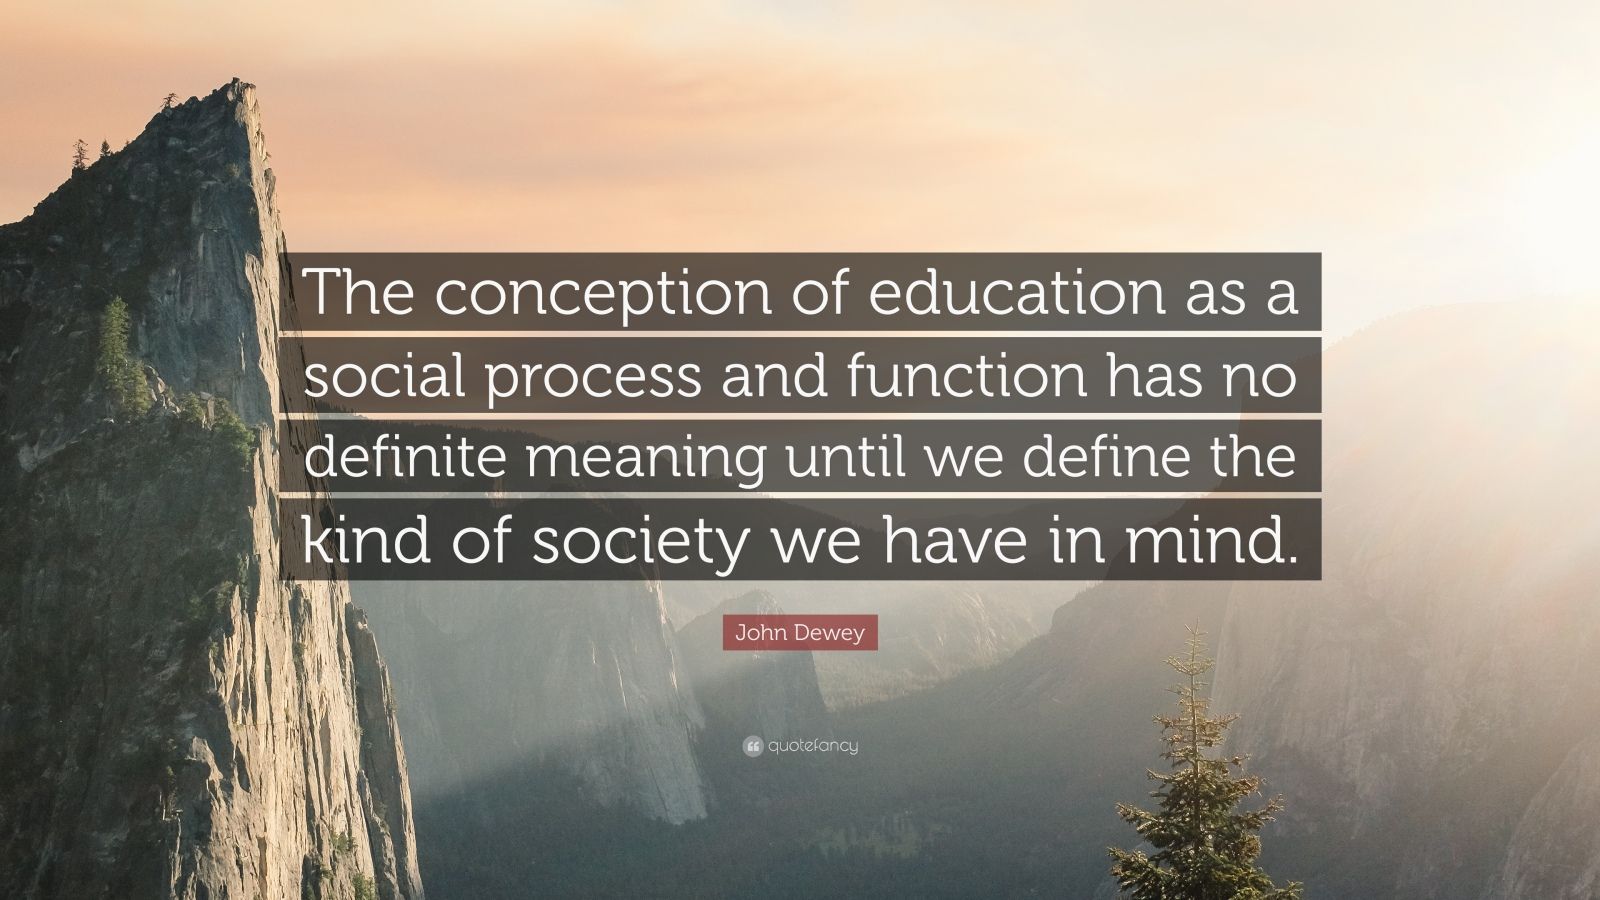 John Dewey Quote: “The conception of education as a social process and